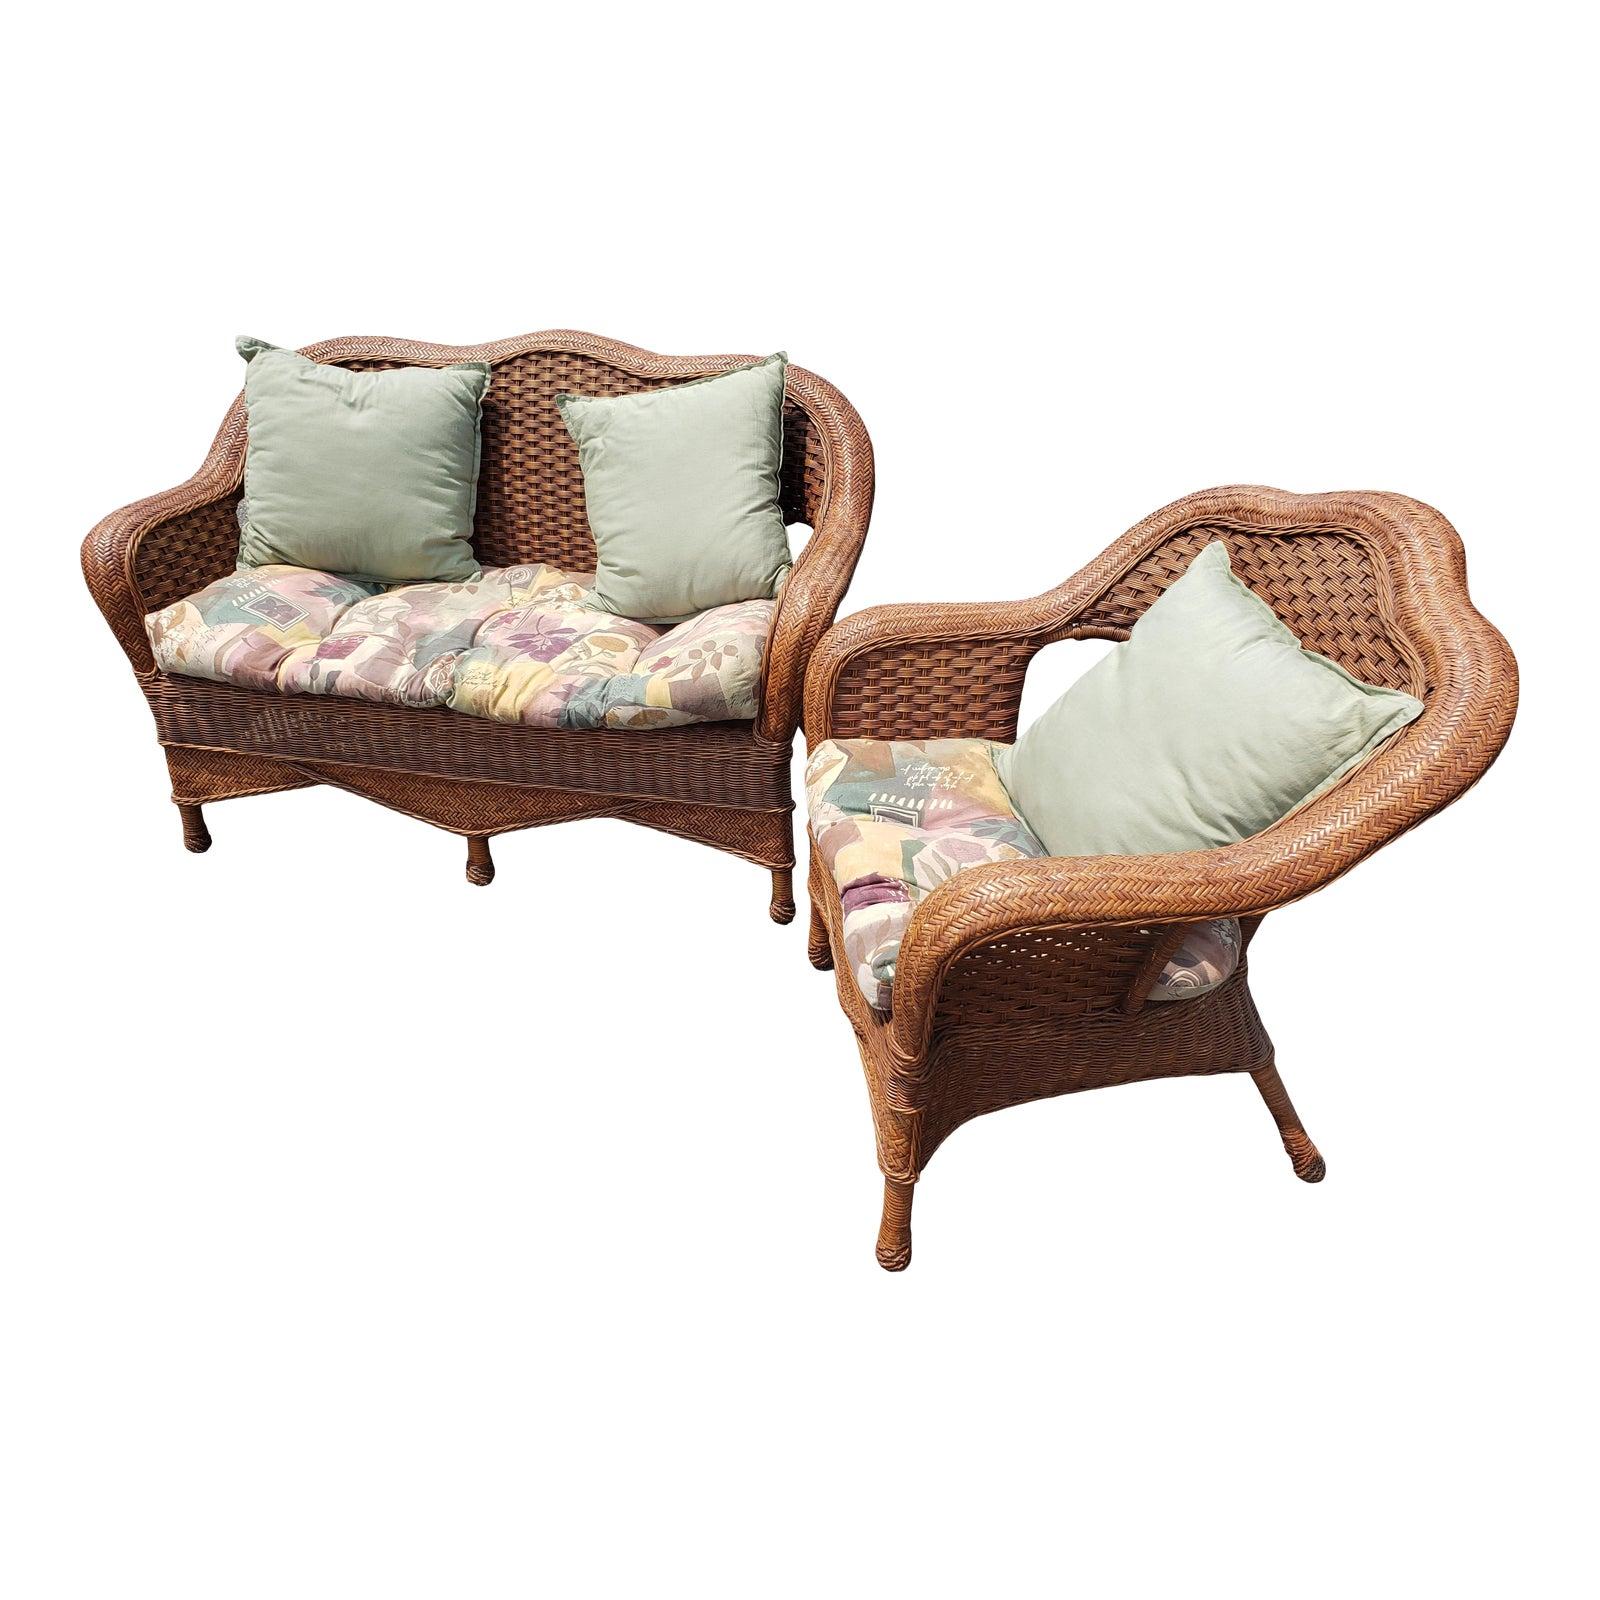 1960s Vintage Wicker Rattan Loveseat and Chair Set in Floral Upholstery, 2 Pieces